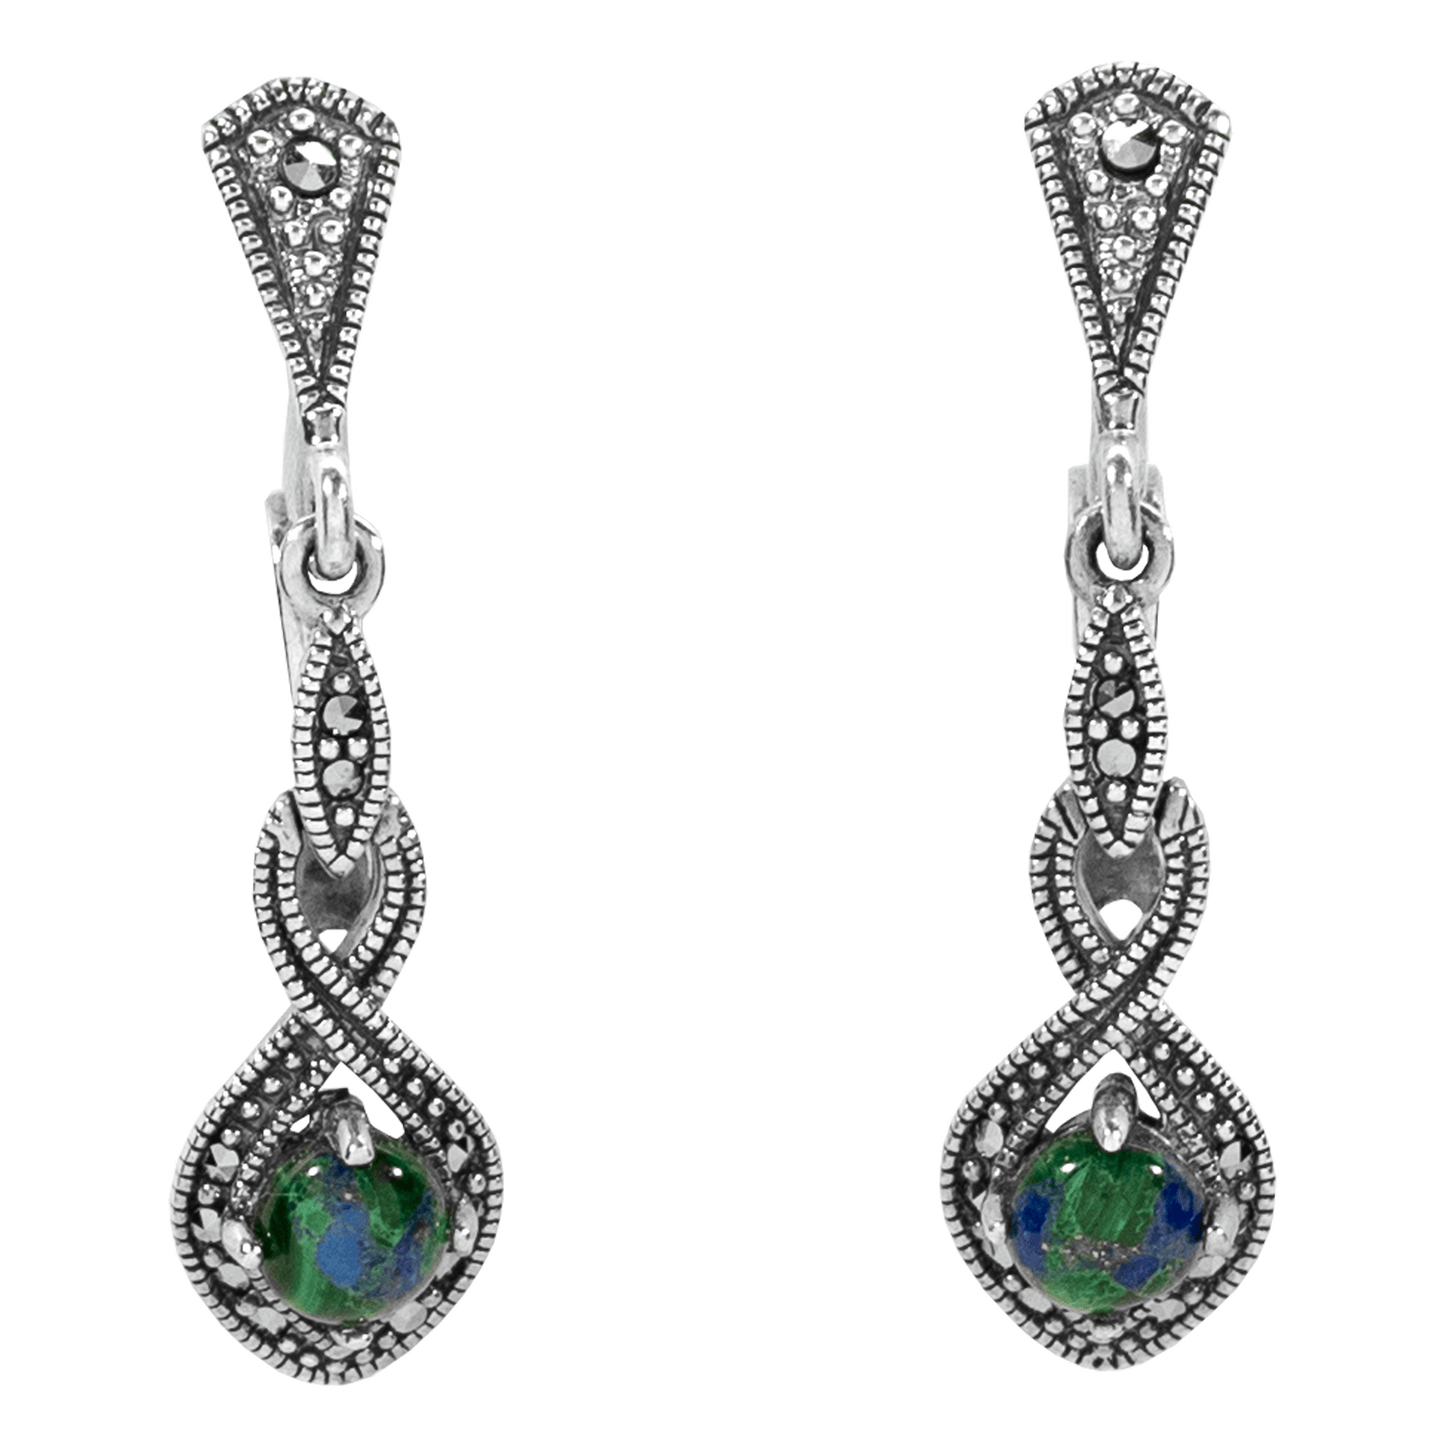 Eilat Stone held by Infinity Pedant with Marcasite Crystals earring